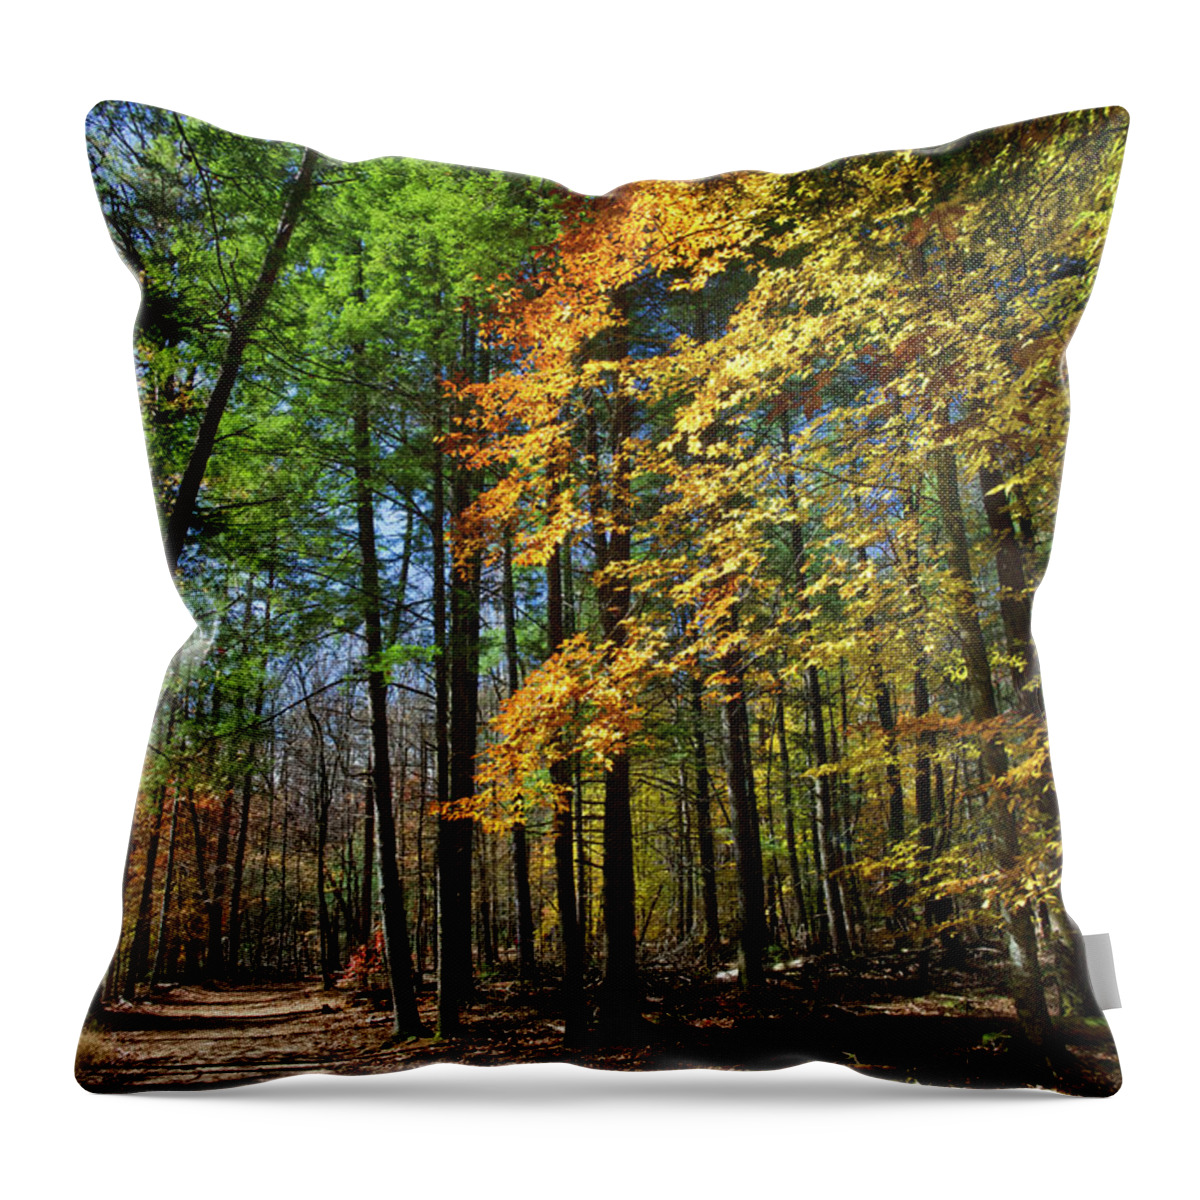 Autumn Throw Pillow featuring the photograph Cades Cove Landscape 5 by Phil Perkins